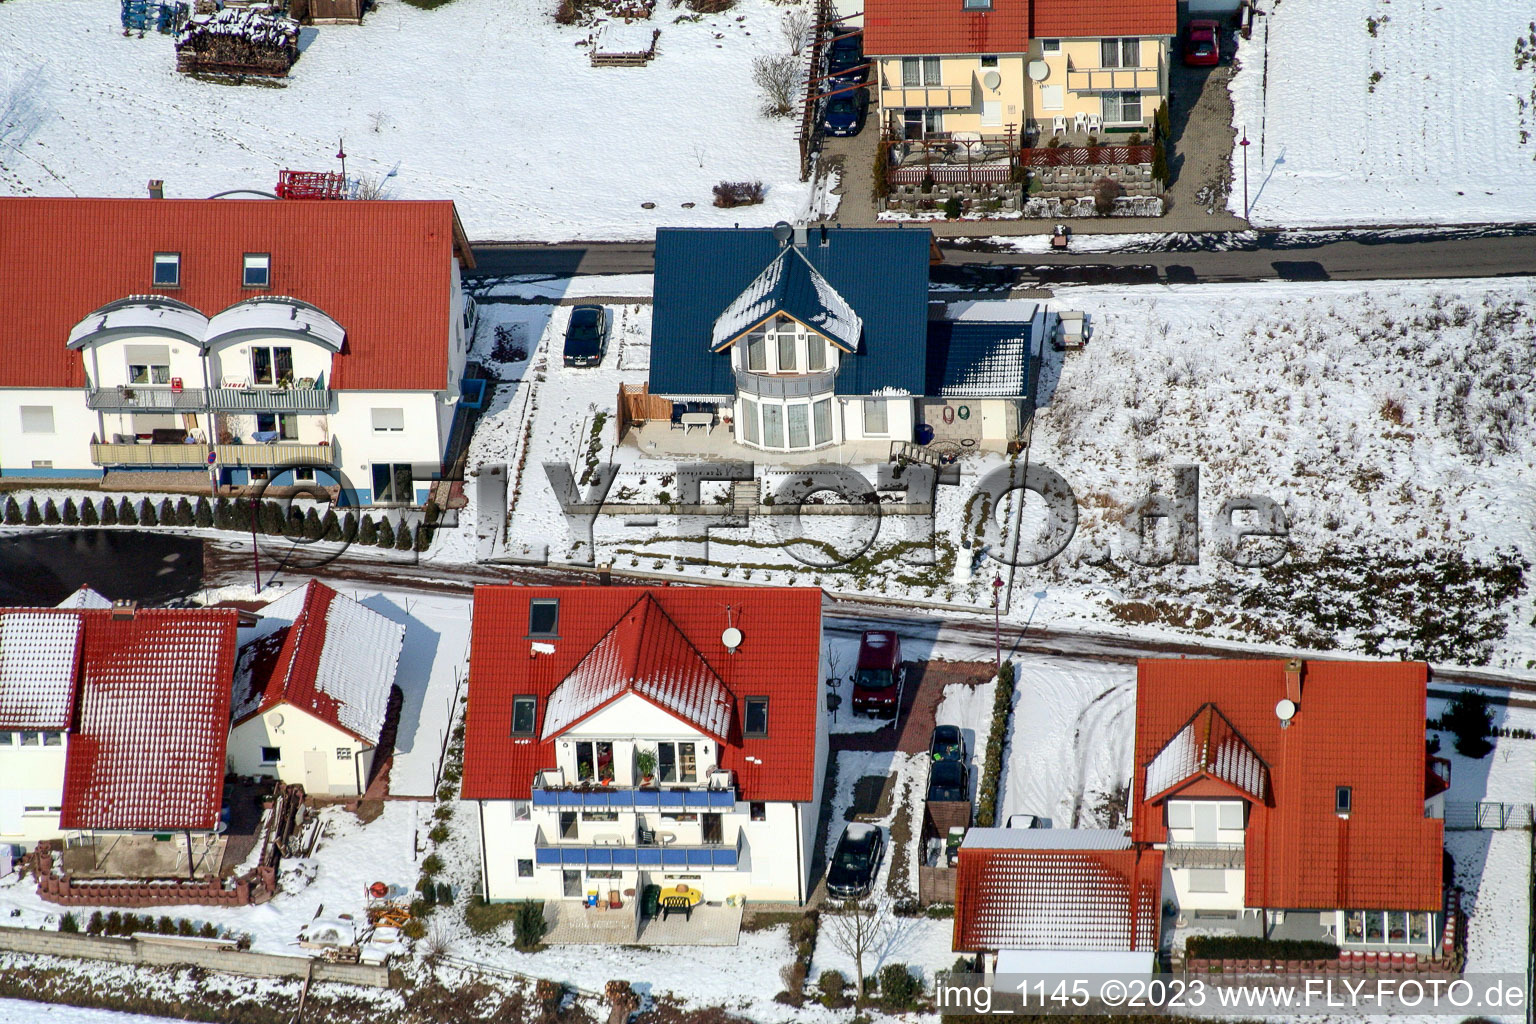 Aerial view of In the snow in Freckenfeld in the state Rhineland-Palatinate, Germany